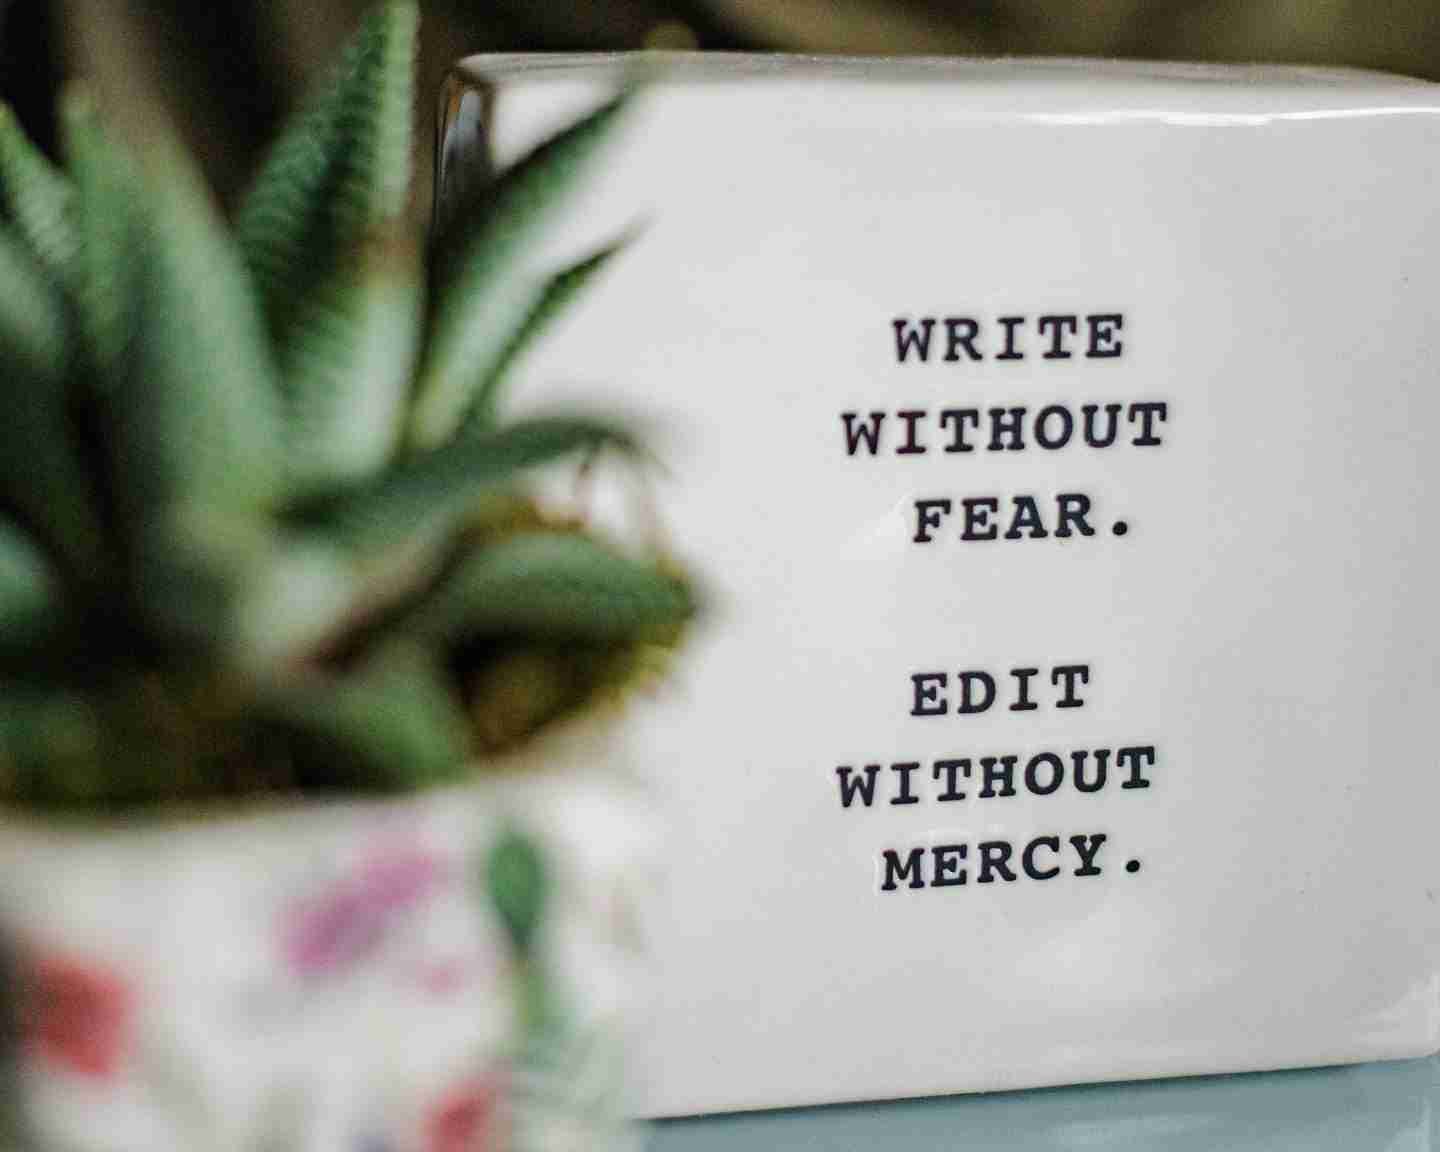 A block saying "Write Without Fear. Edit Without Mercy.", with a small house plant to the left of it.